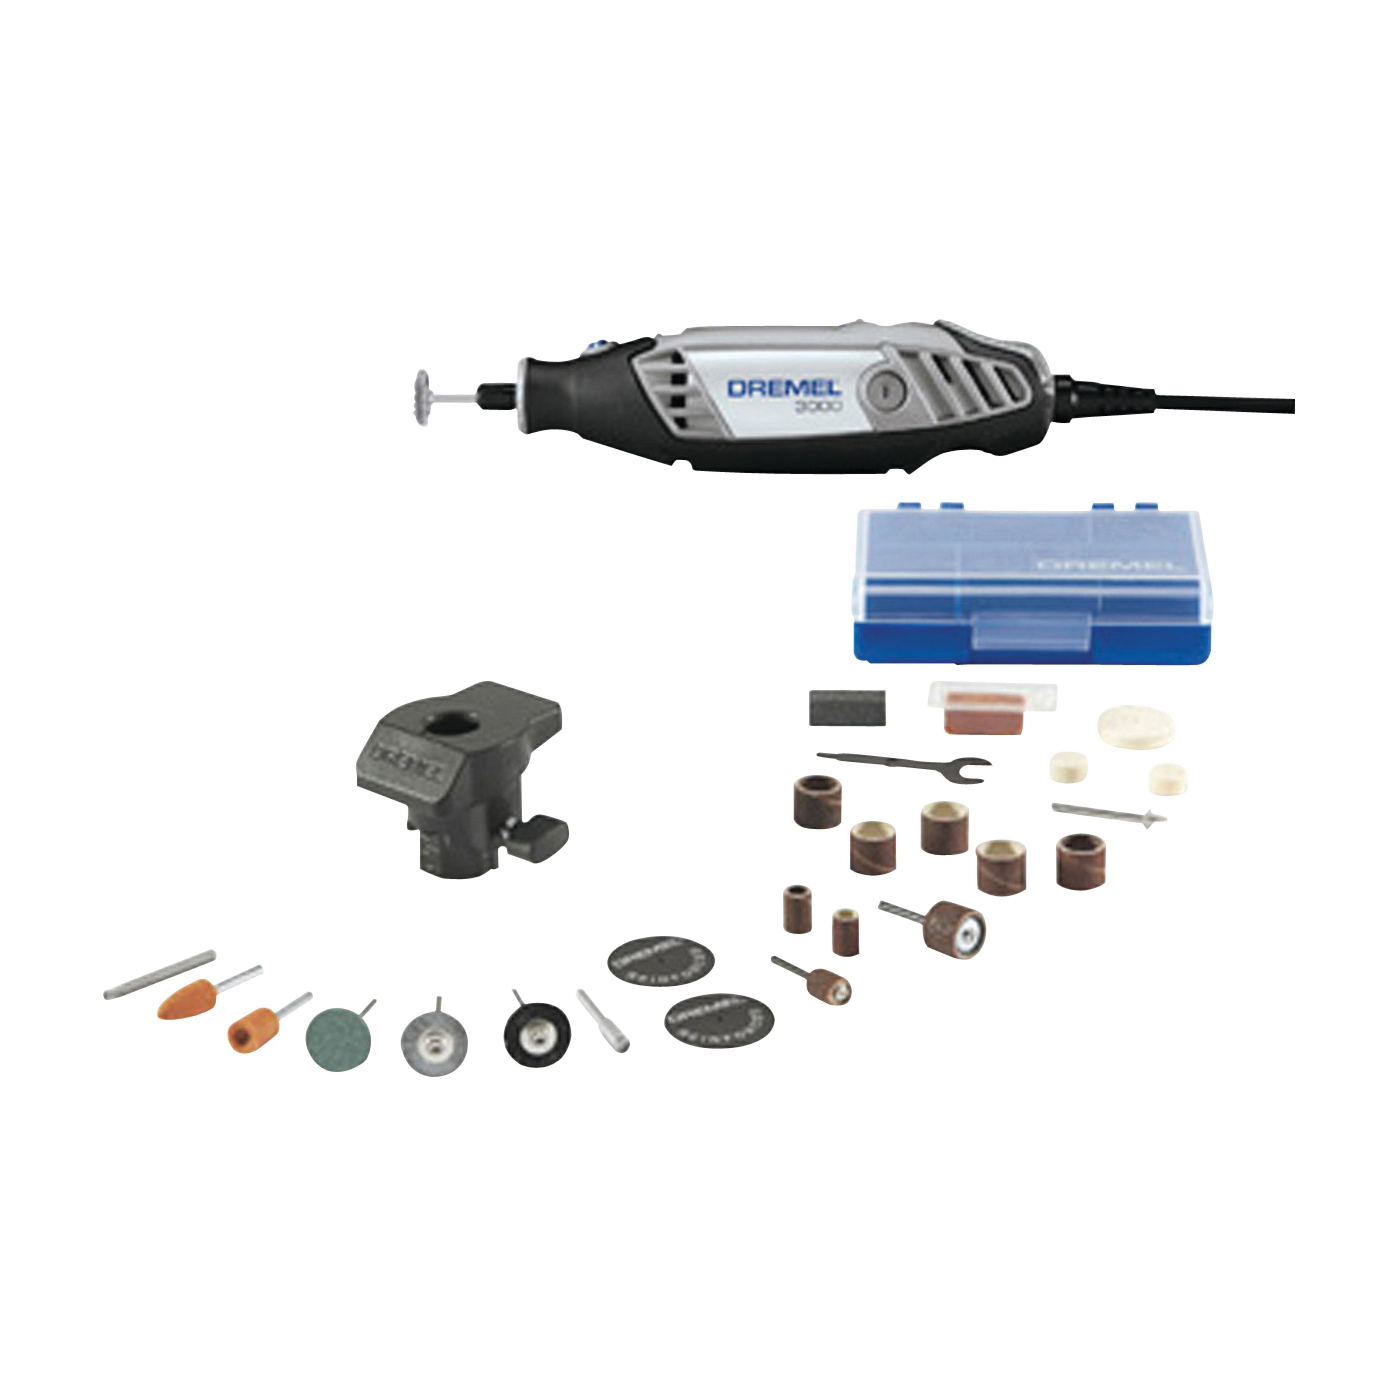 Dremel 3000-1/24 Rotary Tool Kit, 1.2 A, 1/32 to 1/8 in Chuck, Keyed Chuck, 5000 to 35,000 rpm Speed